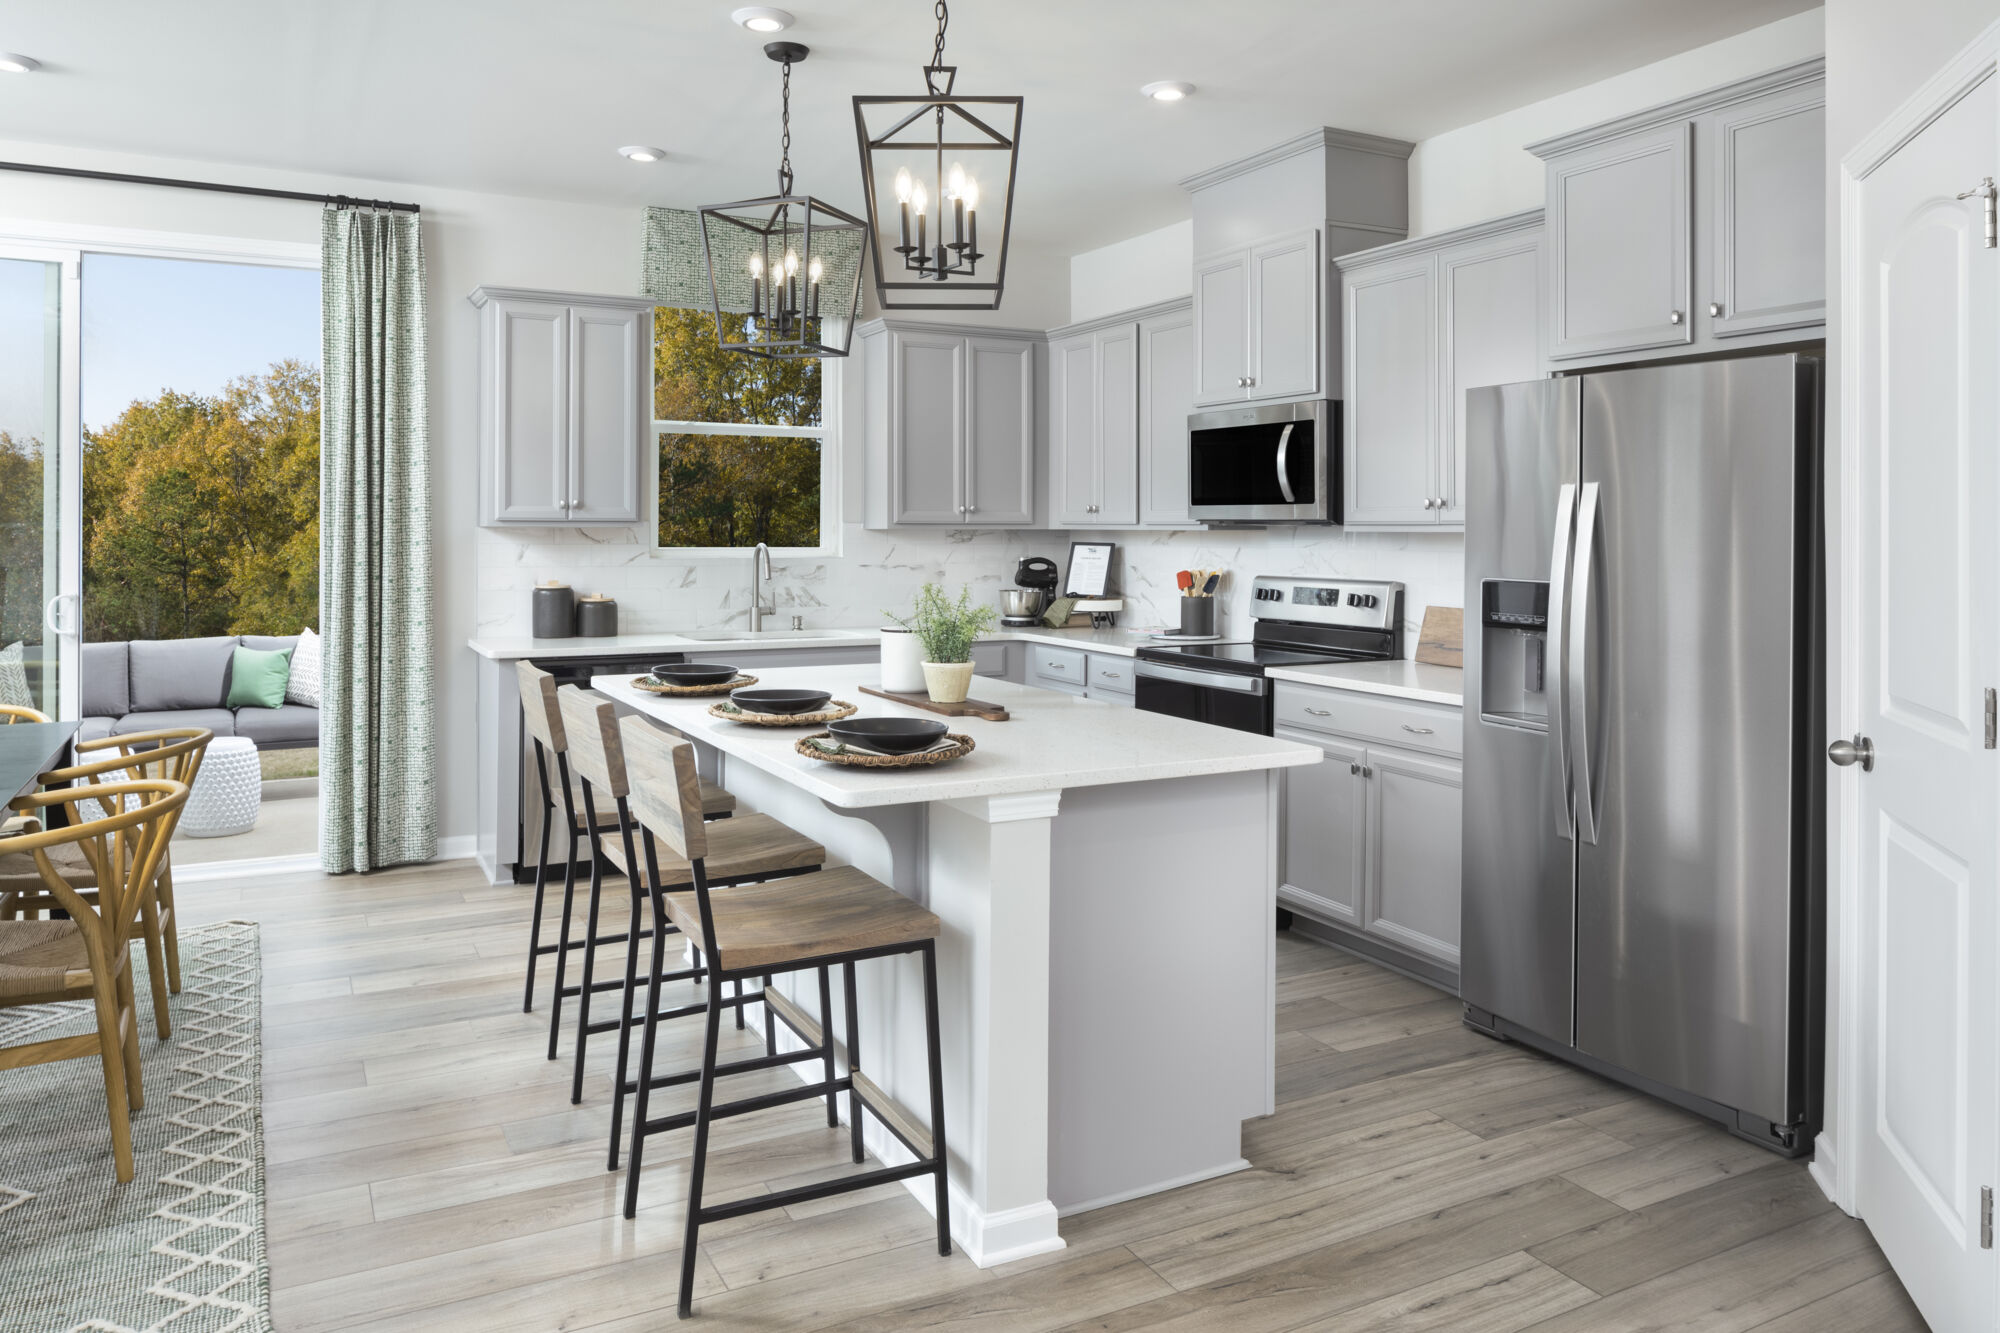 L-Shaped Kitchen with window, door, pendant light, curtains, refrigerator, range, white cabinets and wood flooring